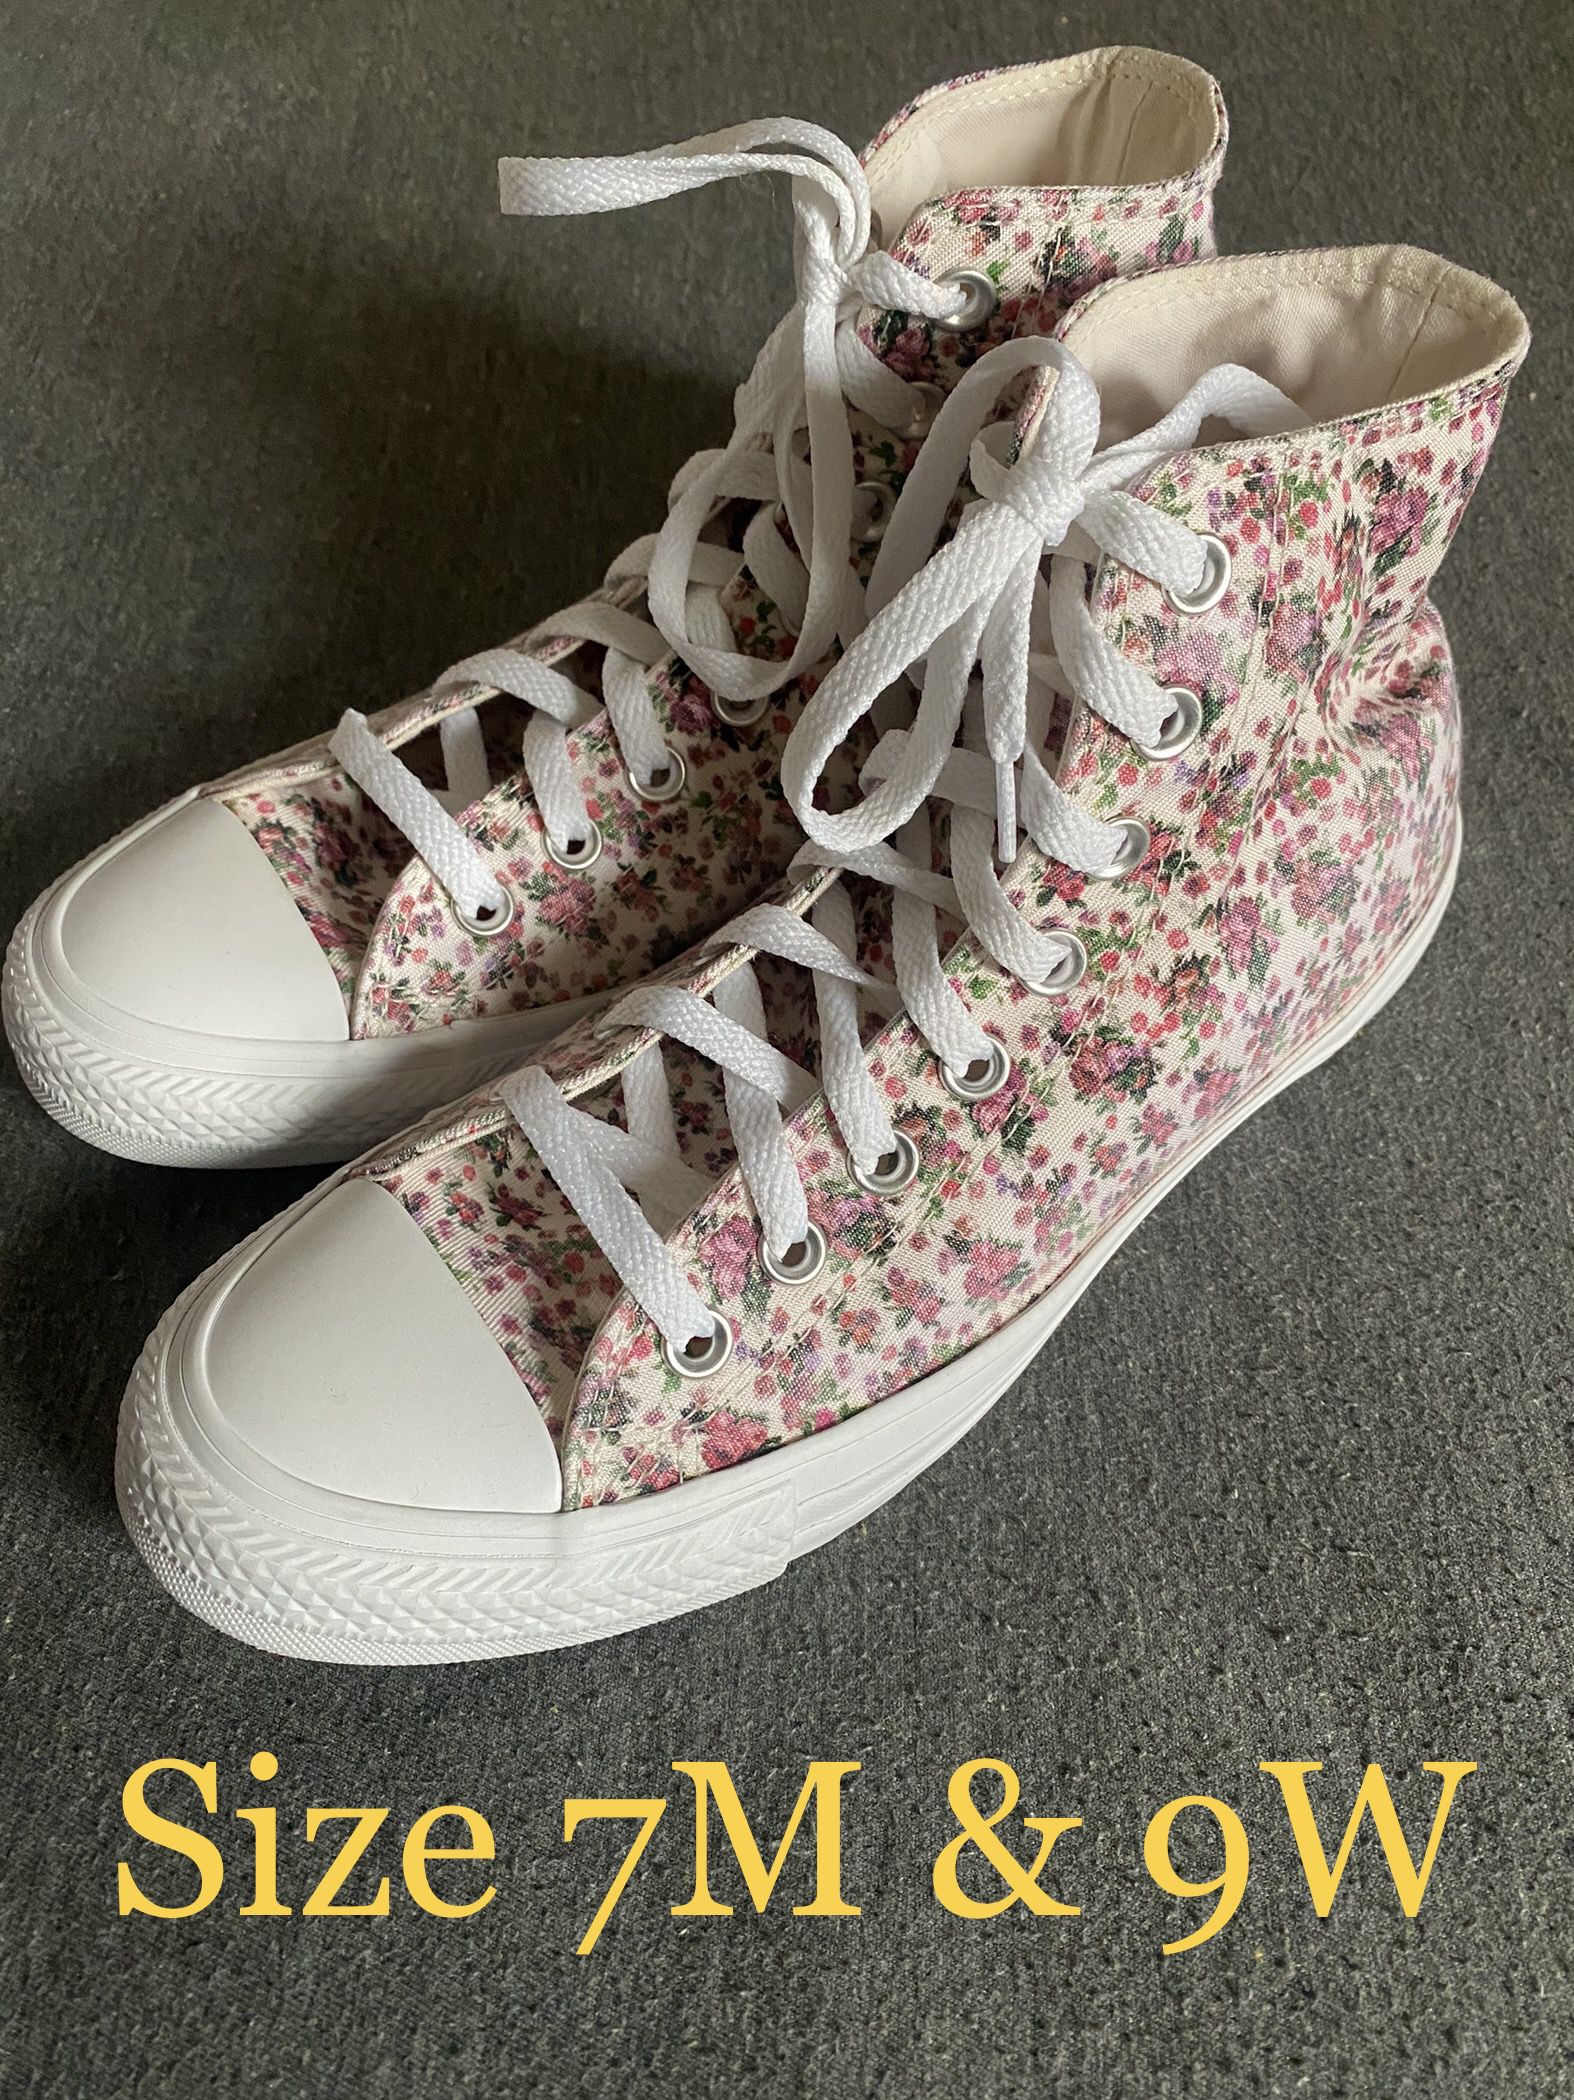 Converse Floral High Tops 🌸 